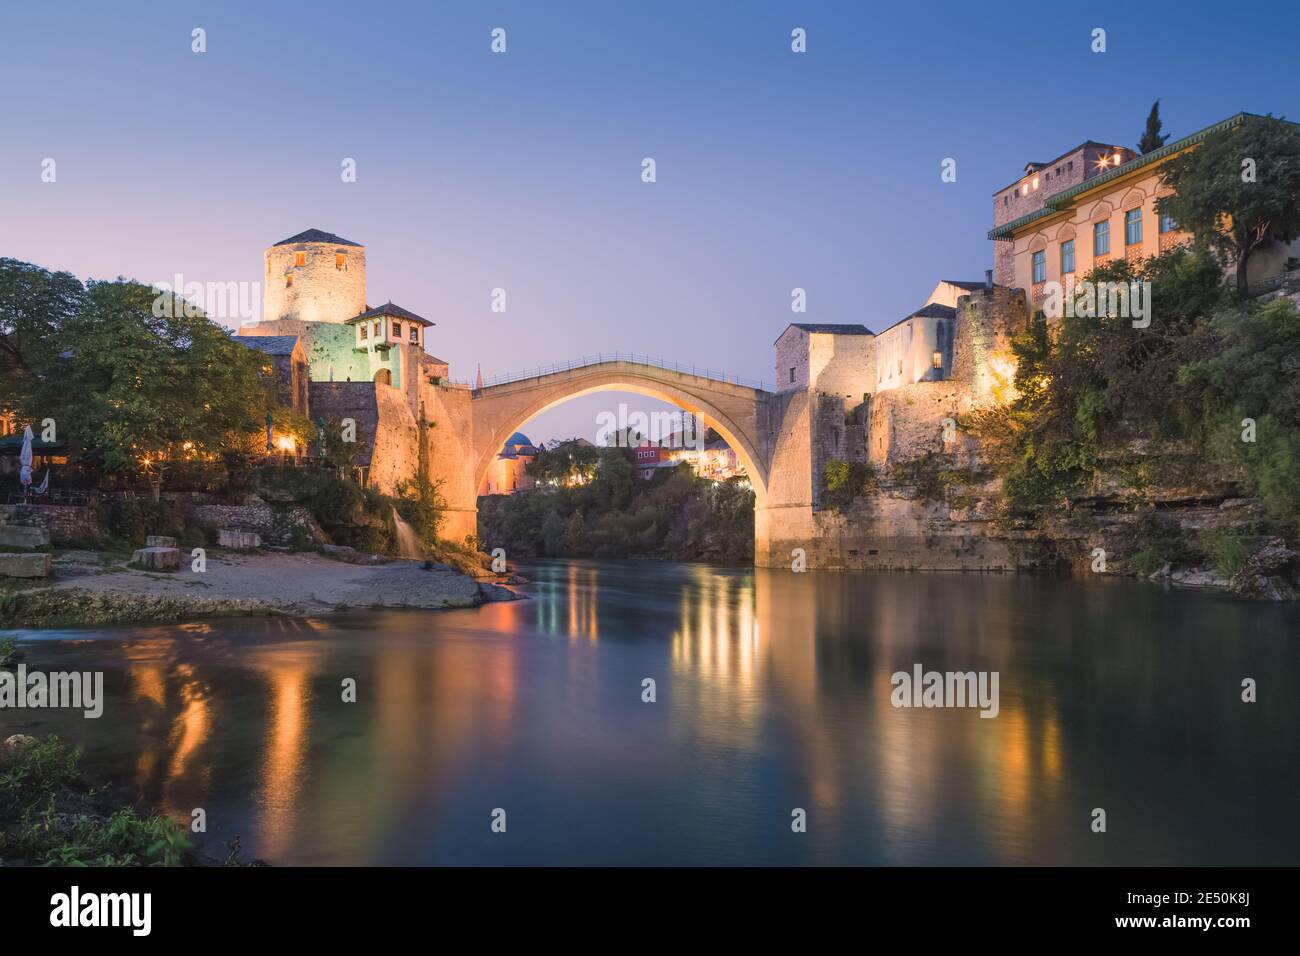 Evening, blue hour view of the iconic Stari Most bridge, Neretva River and old town of Mostar, Bosnia and Herzegovina. Stock Photo